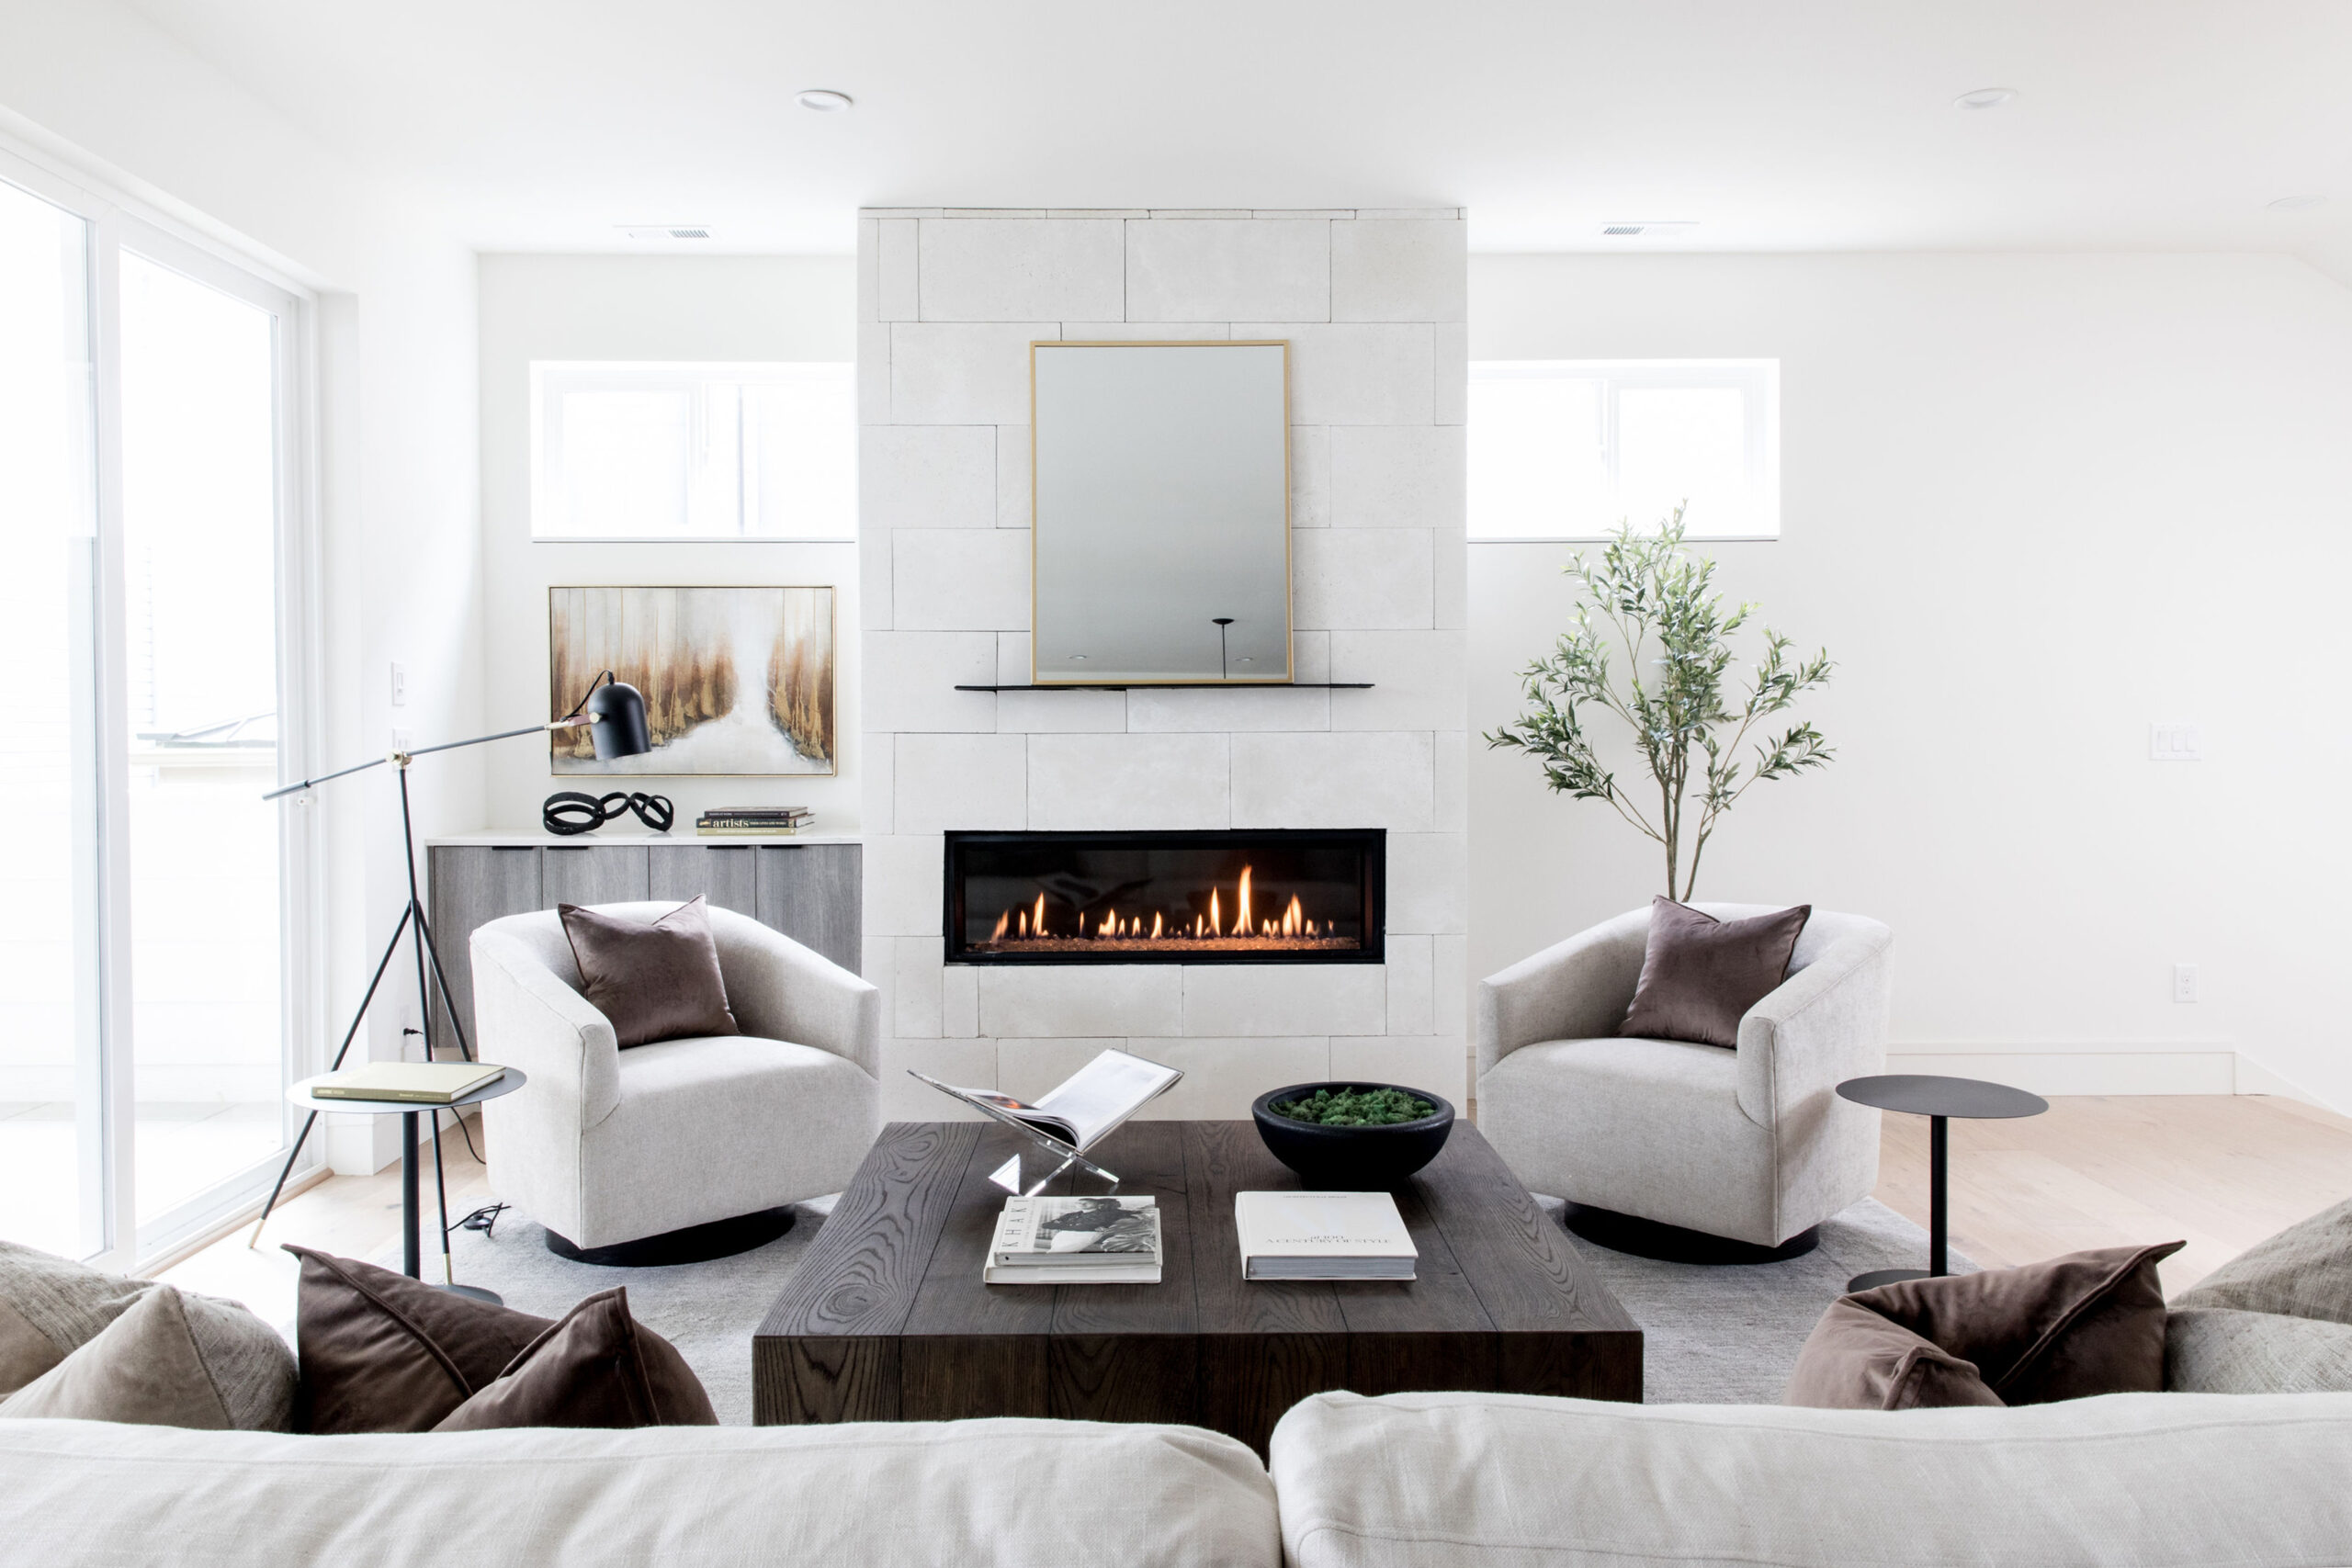 Urban Domain is a boutique home staging and interior design firm providing exceptional design services to Seattle’s Eastside, Seattle, Bellevue, Sammamish, Medina, Kirkland, Tacoma. Our signature clean, urban aesthetic and sophisticated style embody the PNW lifestyle and modern living.